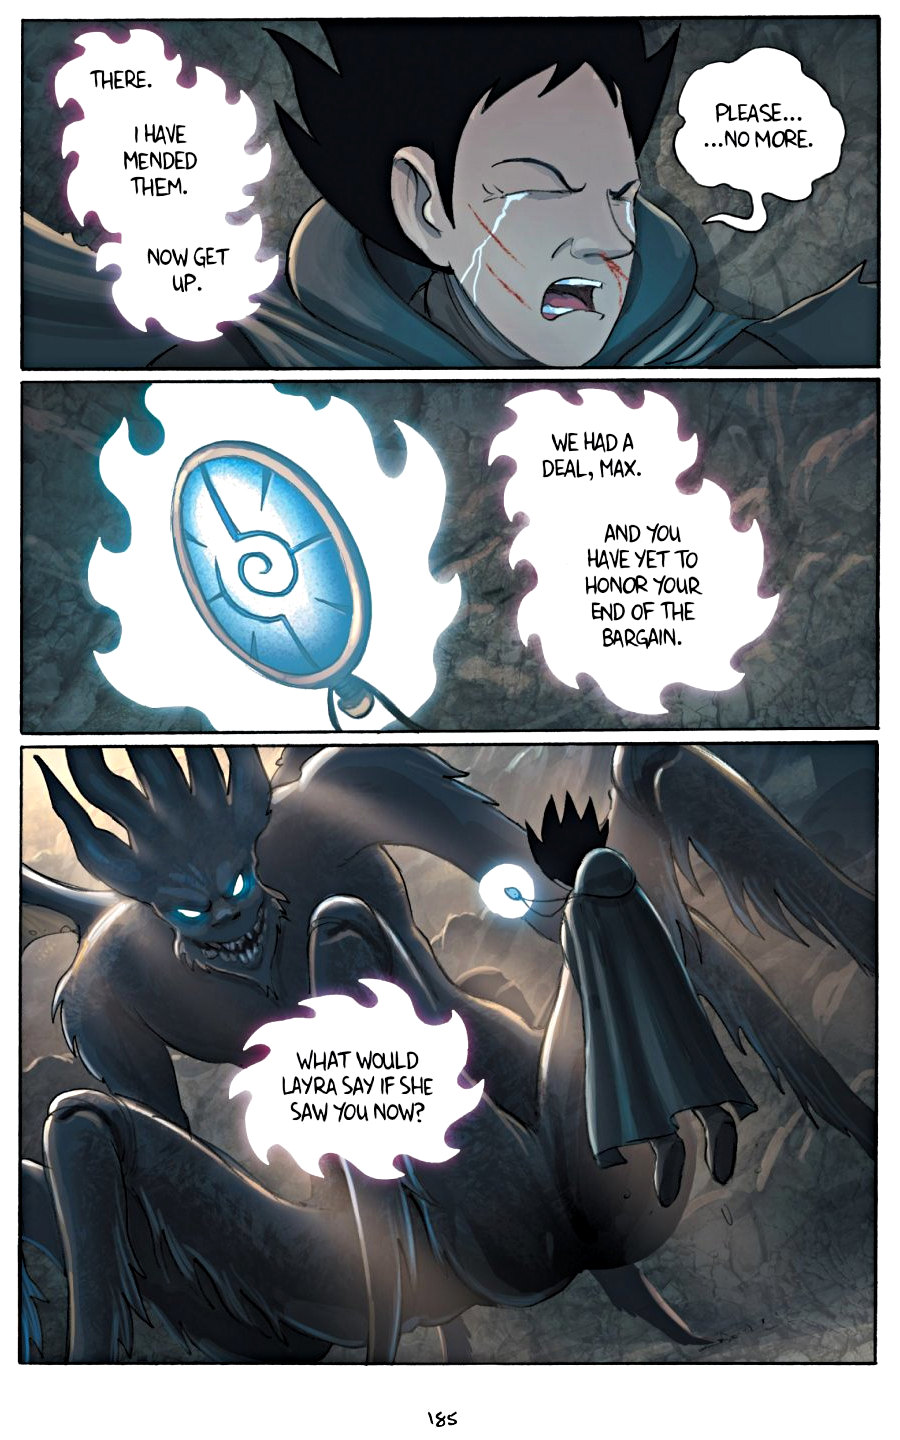 page 185 of amulet 5 prince of the elves graphic novel